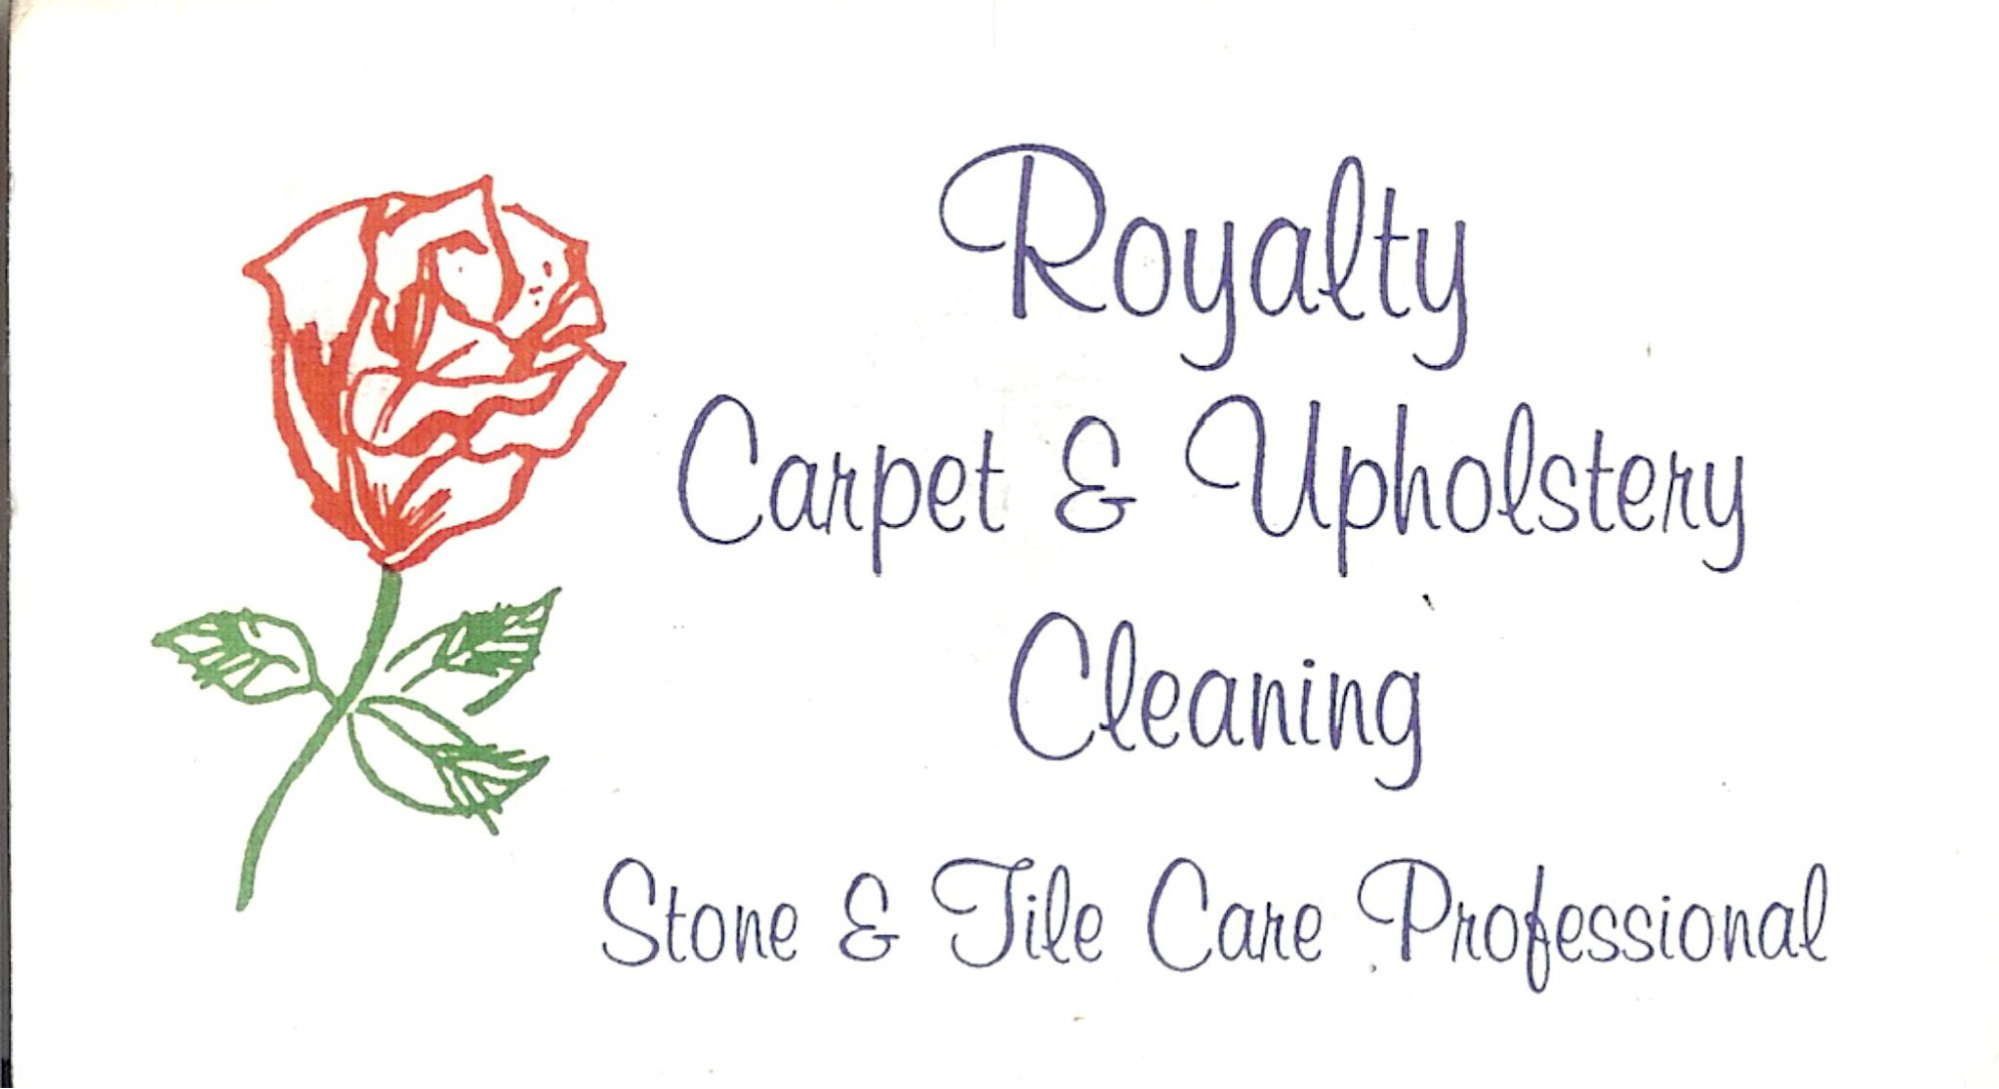 Original Royalty Carpet and Tile Logo from 1986